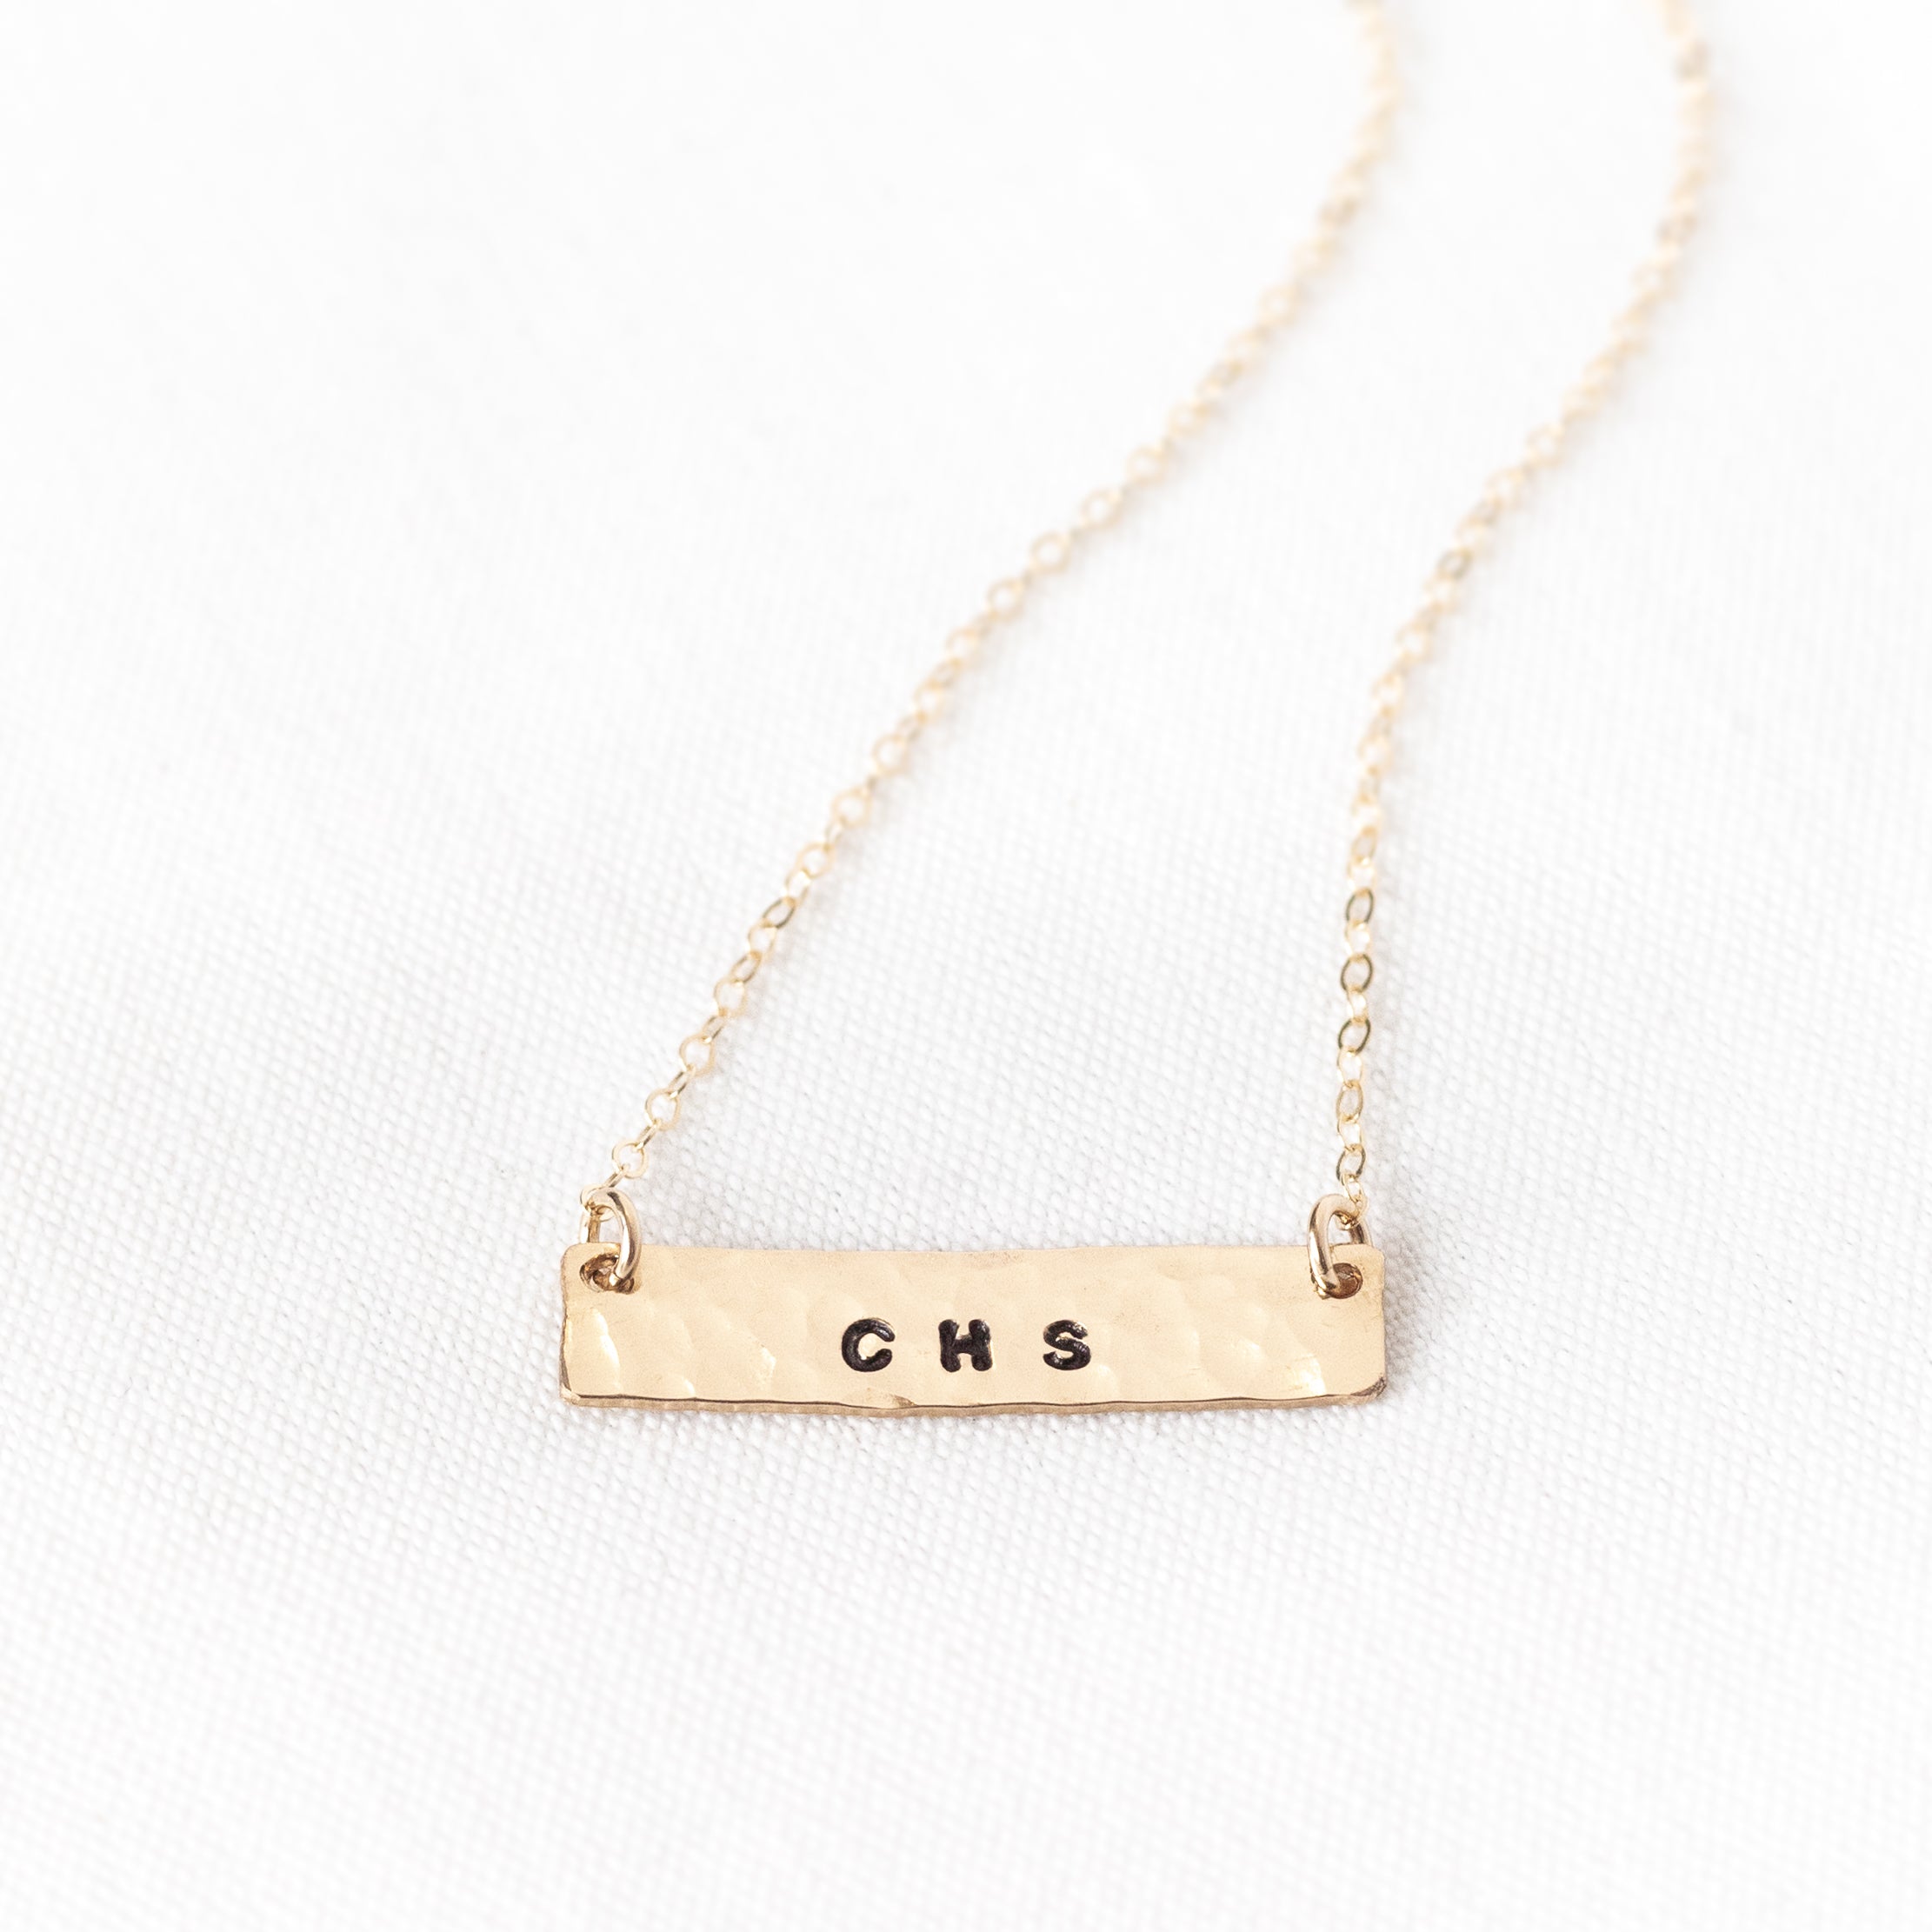 Hand stamped horizontal gold filled bar with phrases on it. Attached to a gold chain. 